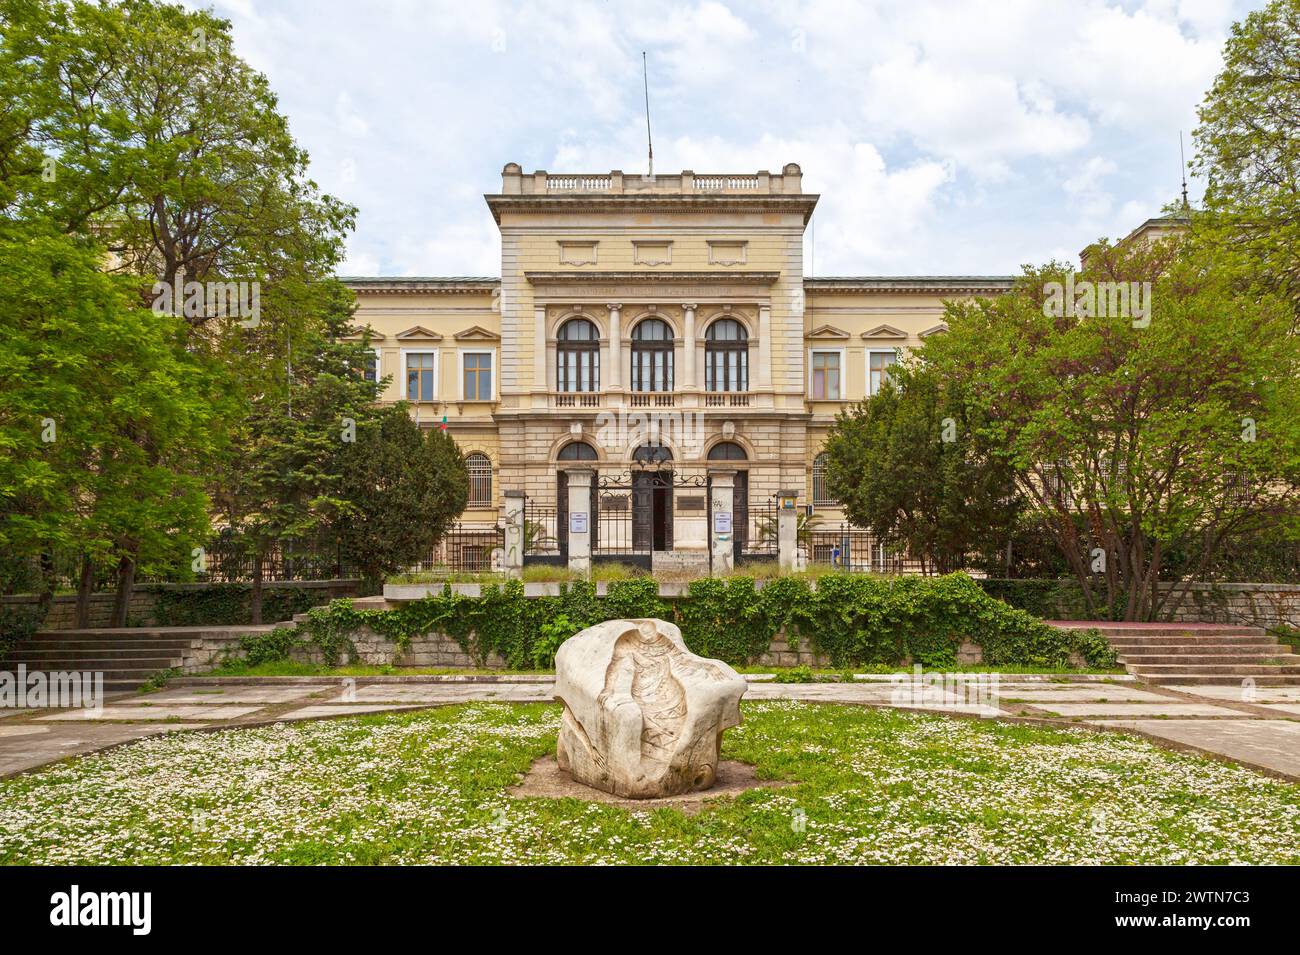 Varna, Bulgaria - May 16 2019: The Archaeology museum is showcasing ancient artifacts from the Varna area, including unique gold pieces. Stock Photo